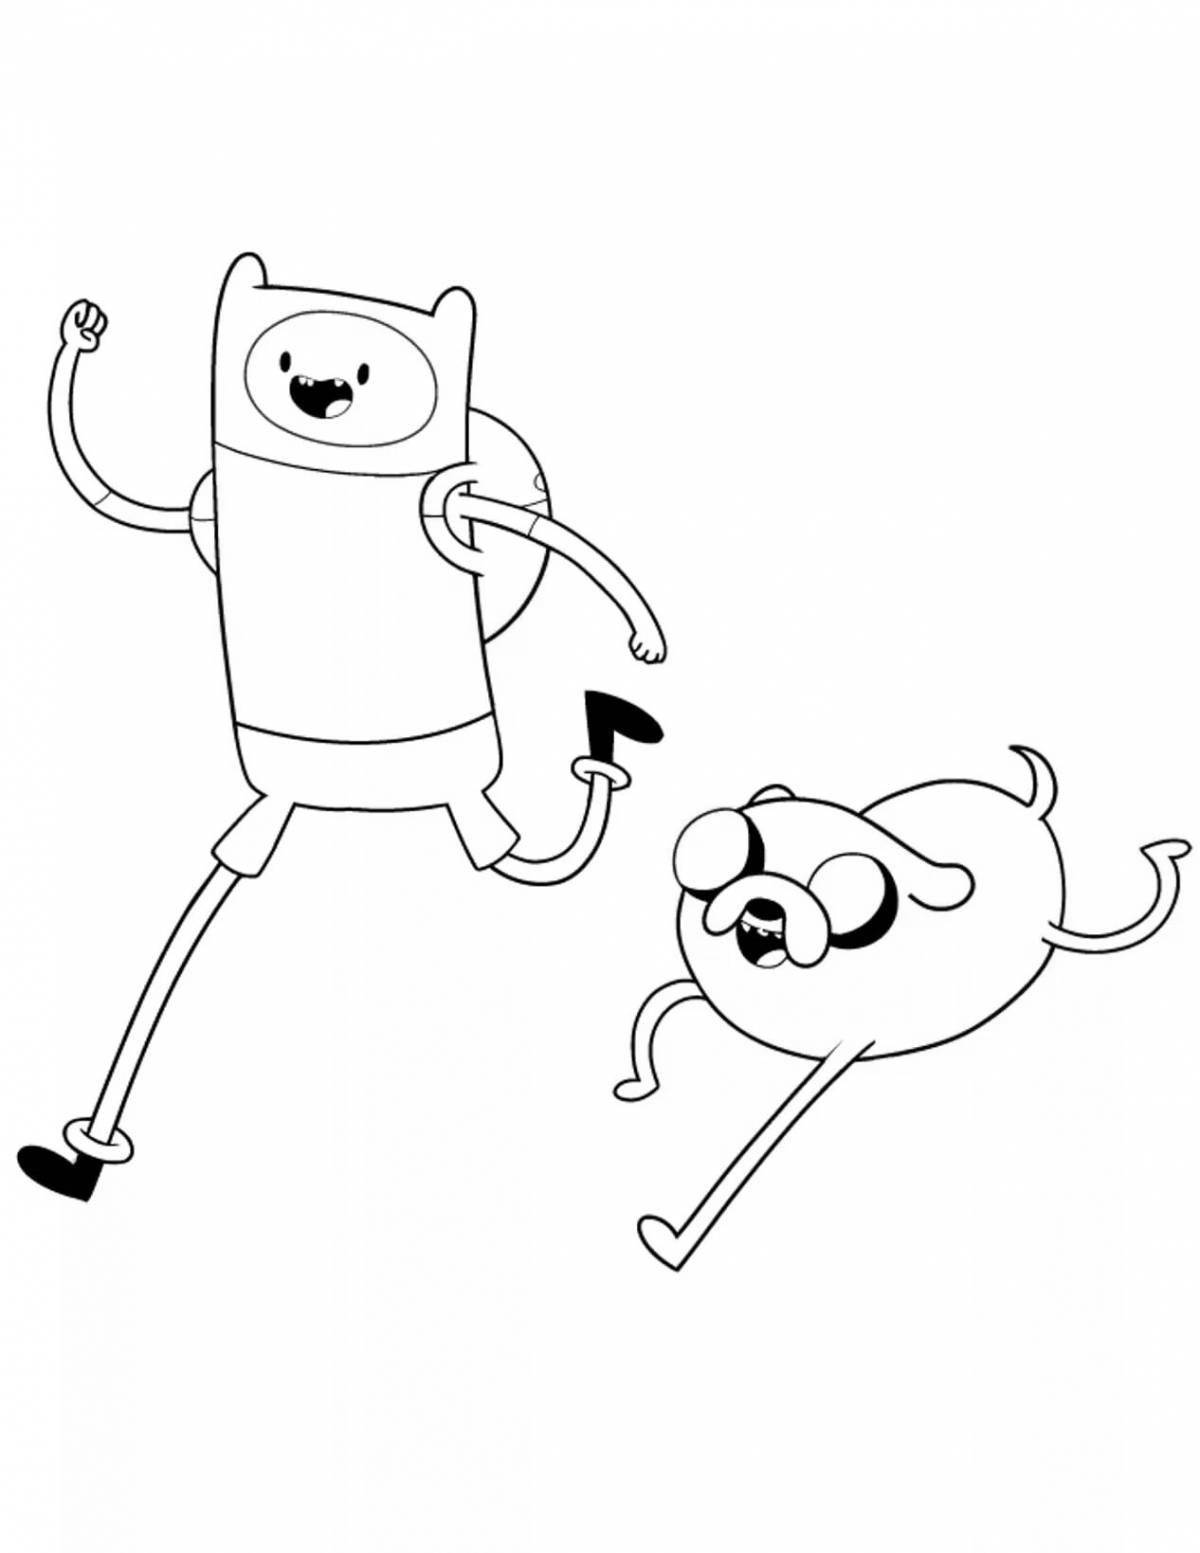 Coloring page jake adventure time